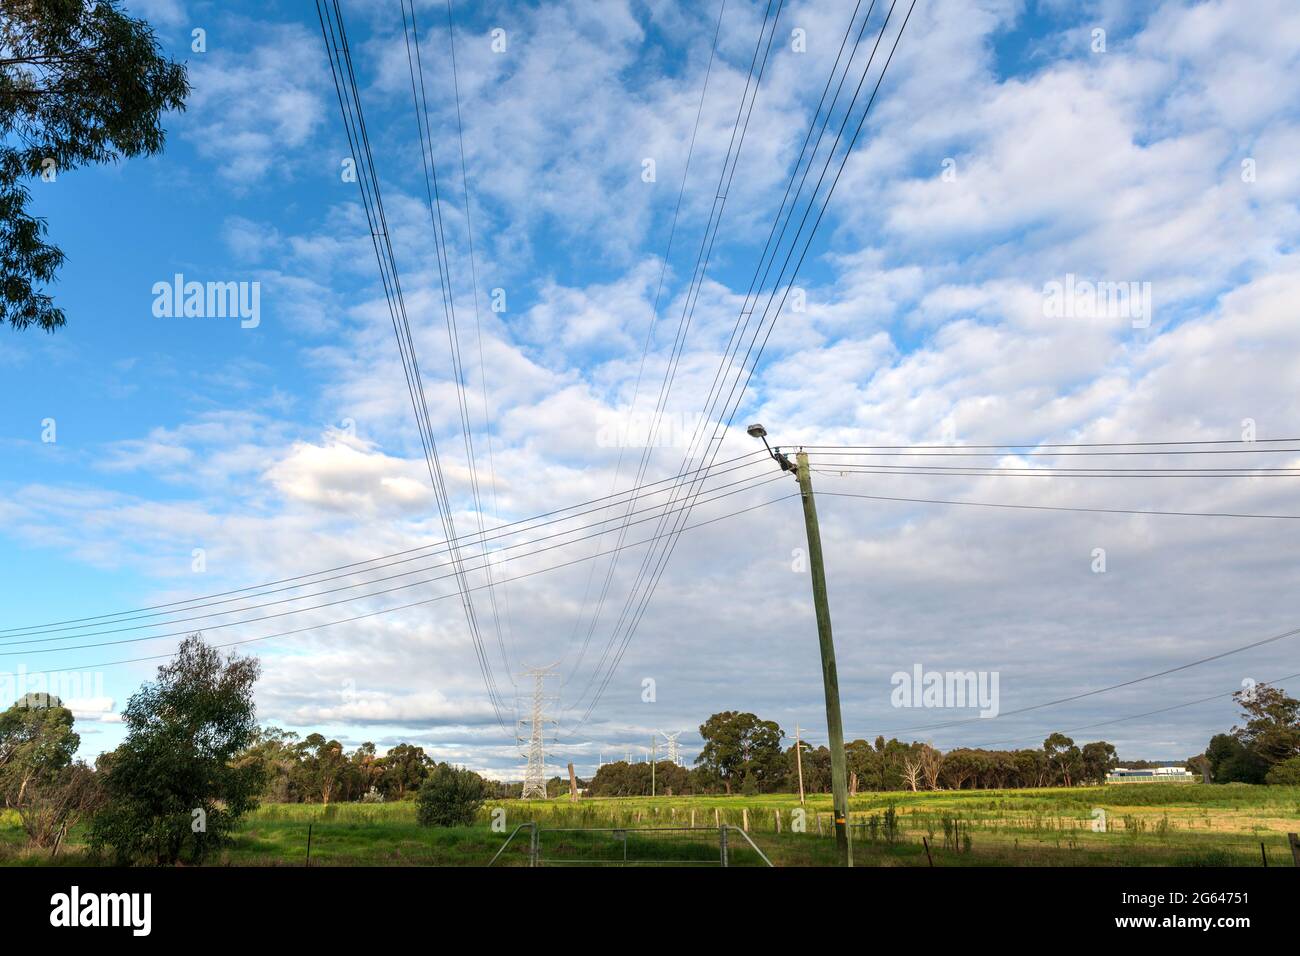 High-tension / High-voltage powerlines intersect with local suburban residential powerlines in an outer-city rural area. Stock Photo